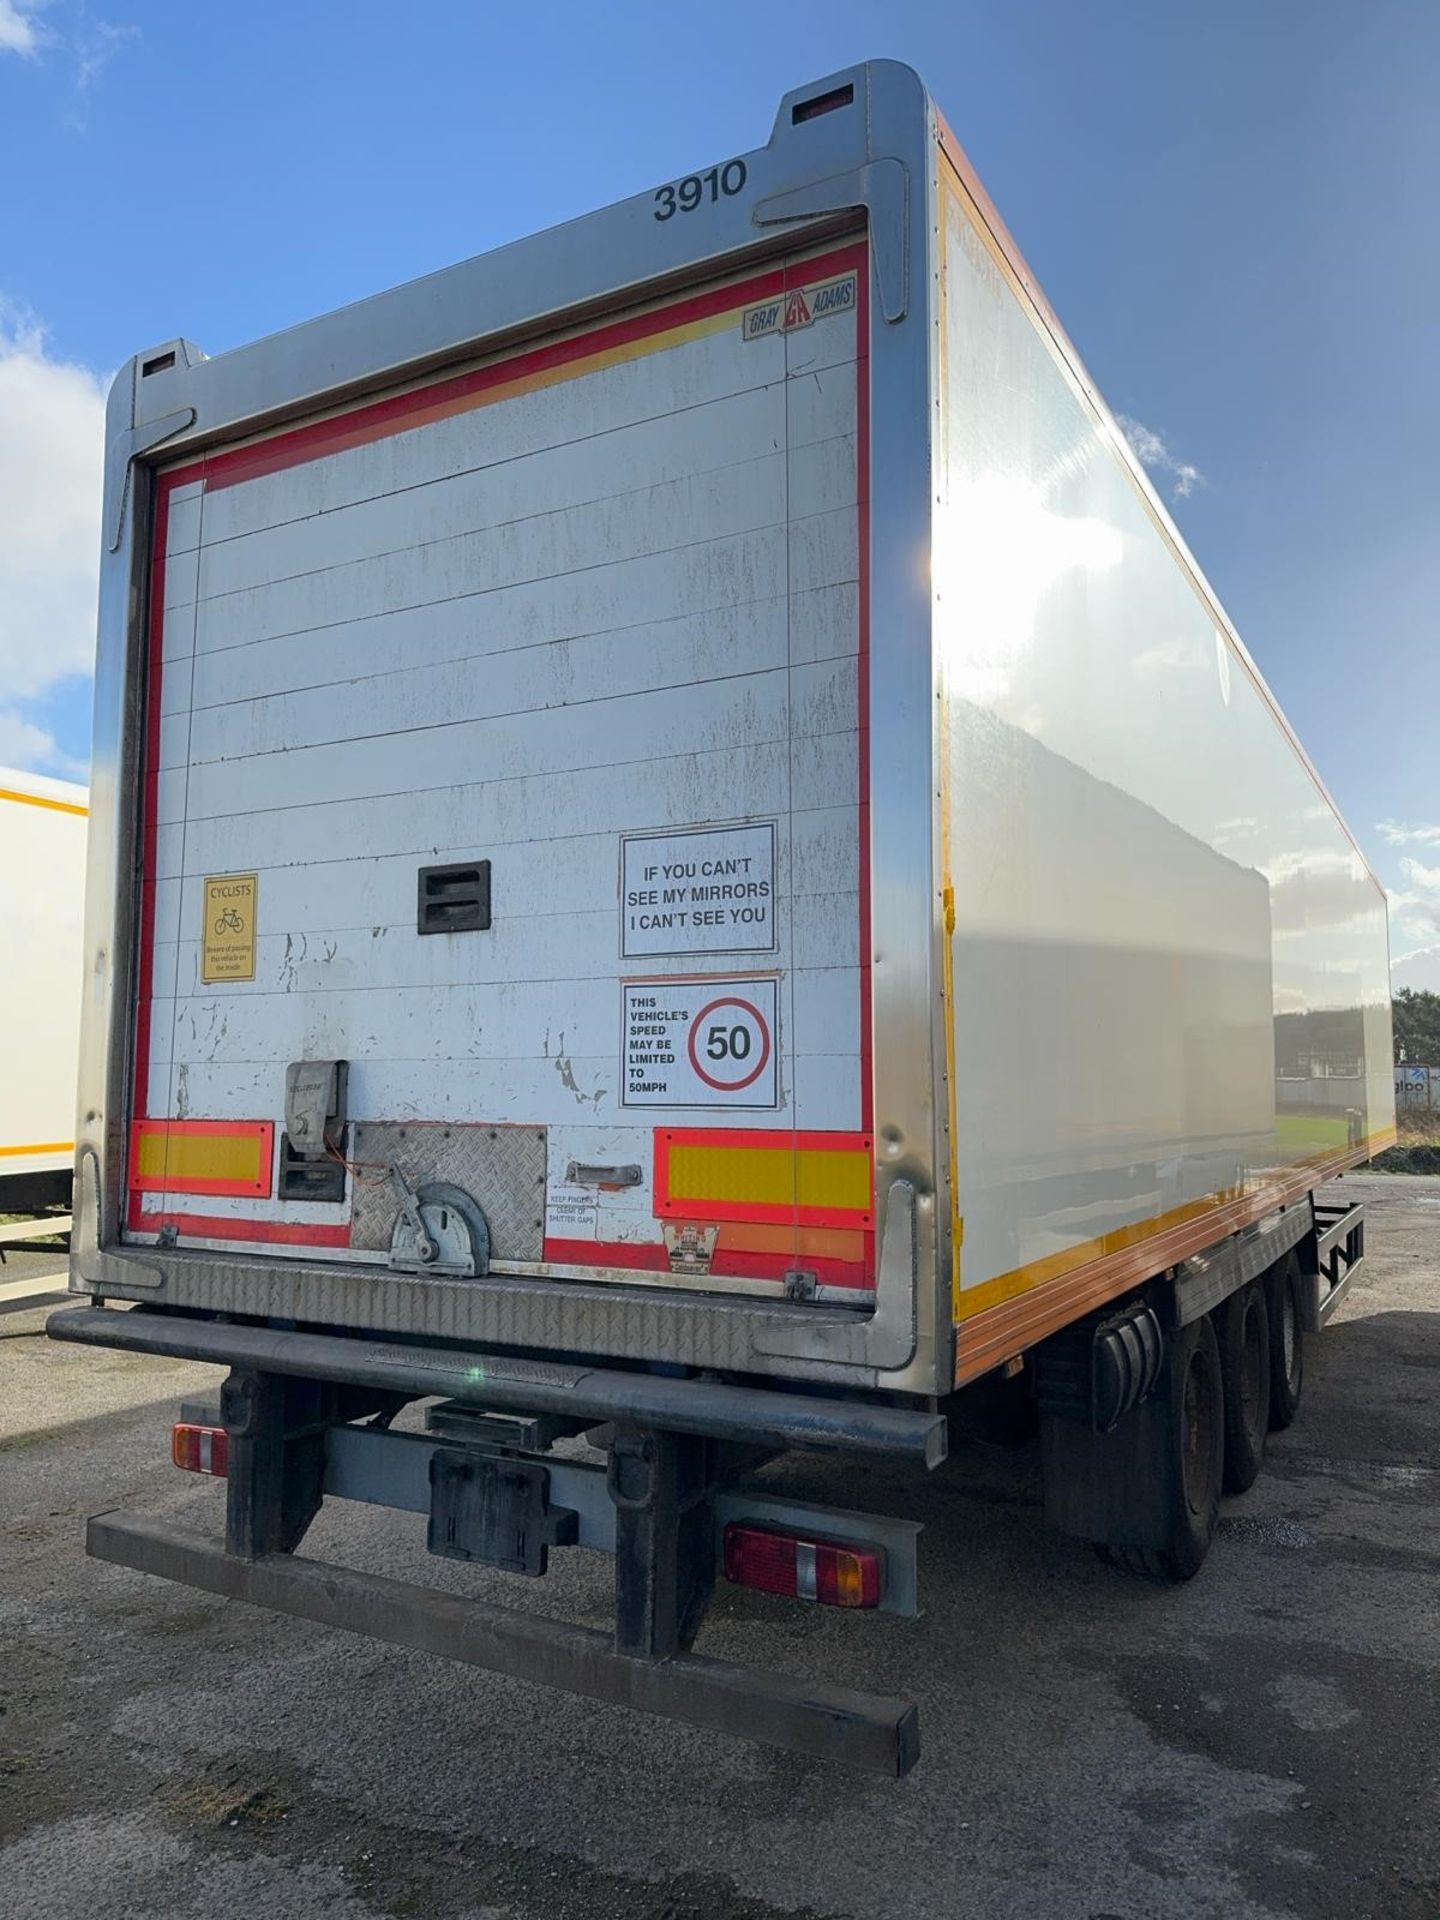 3910 - 2010 Montracon 13.6 Refrigerated Multi-Temp Trailer - Image 12 of 13